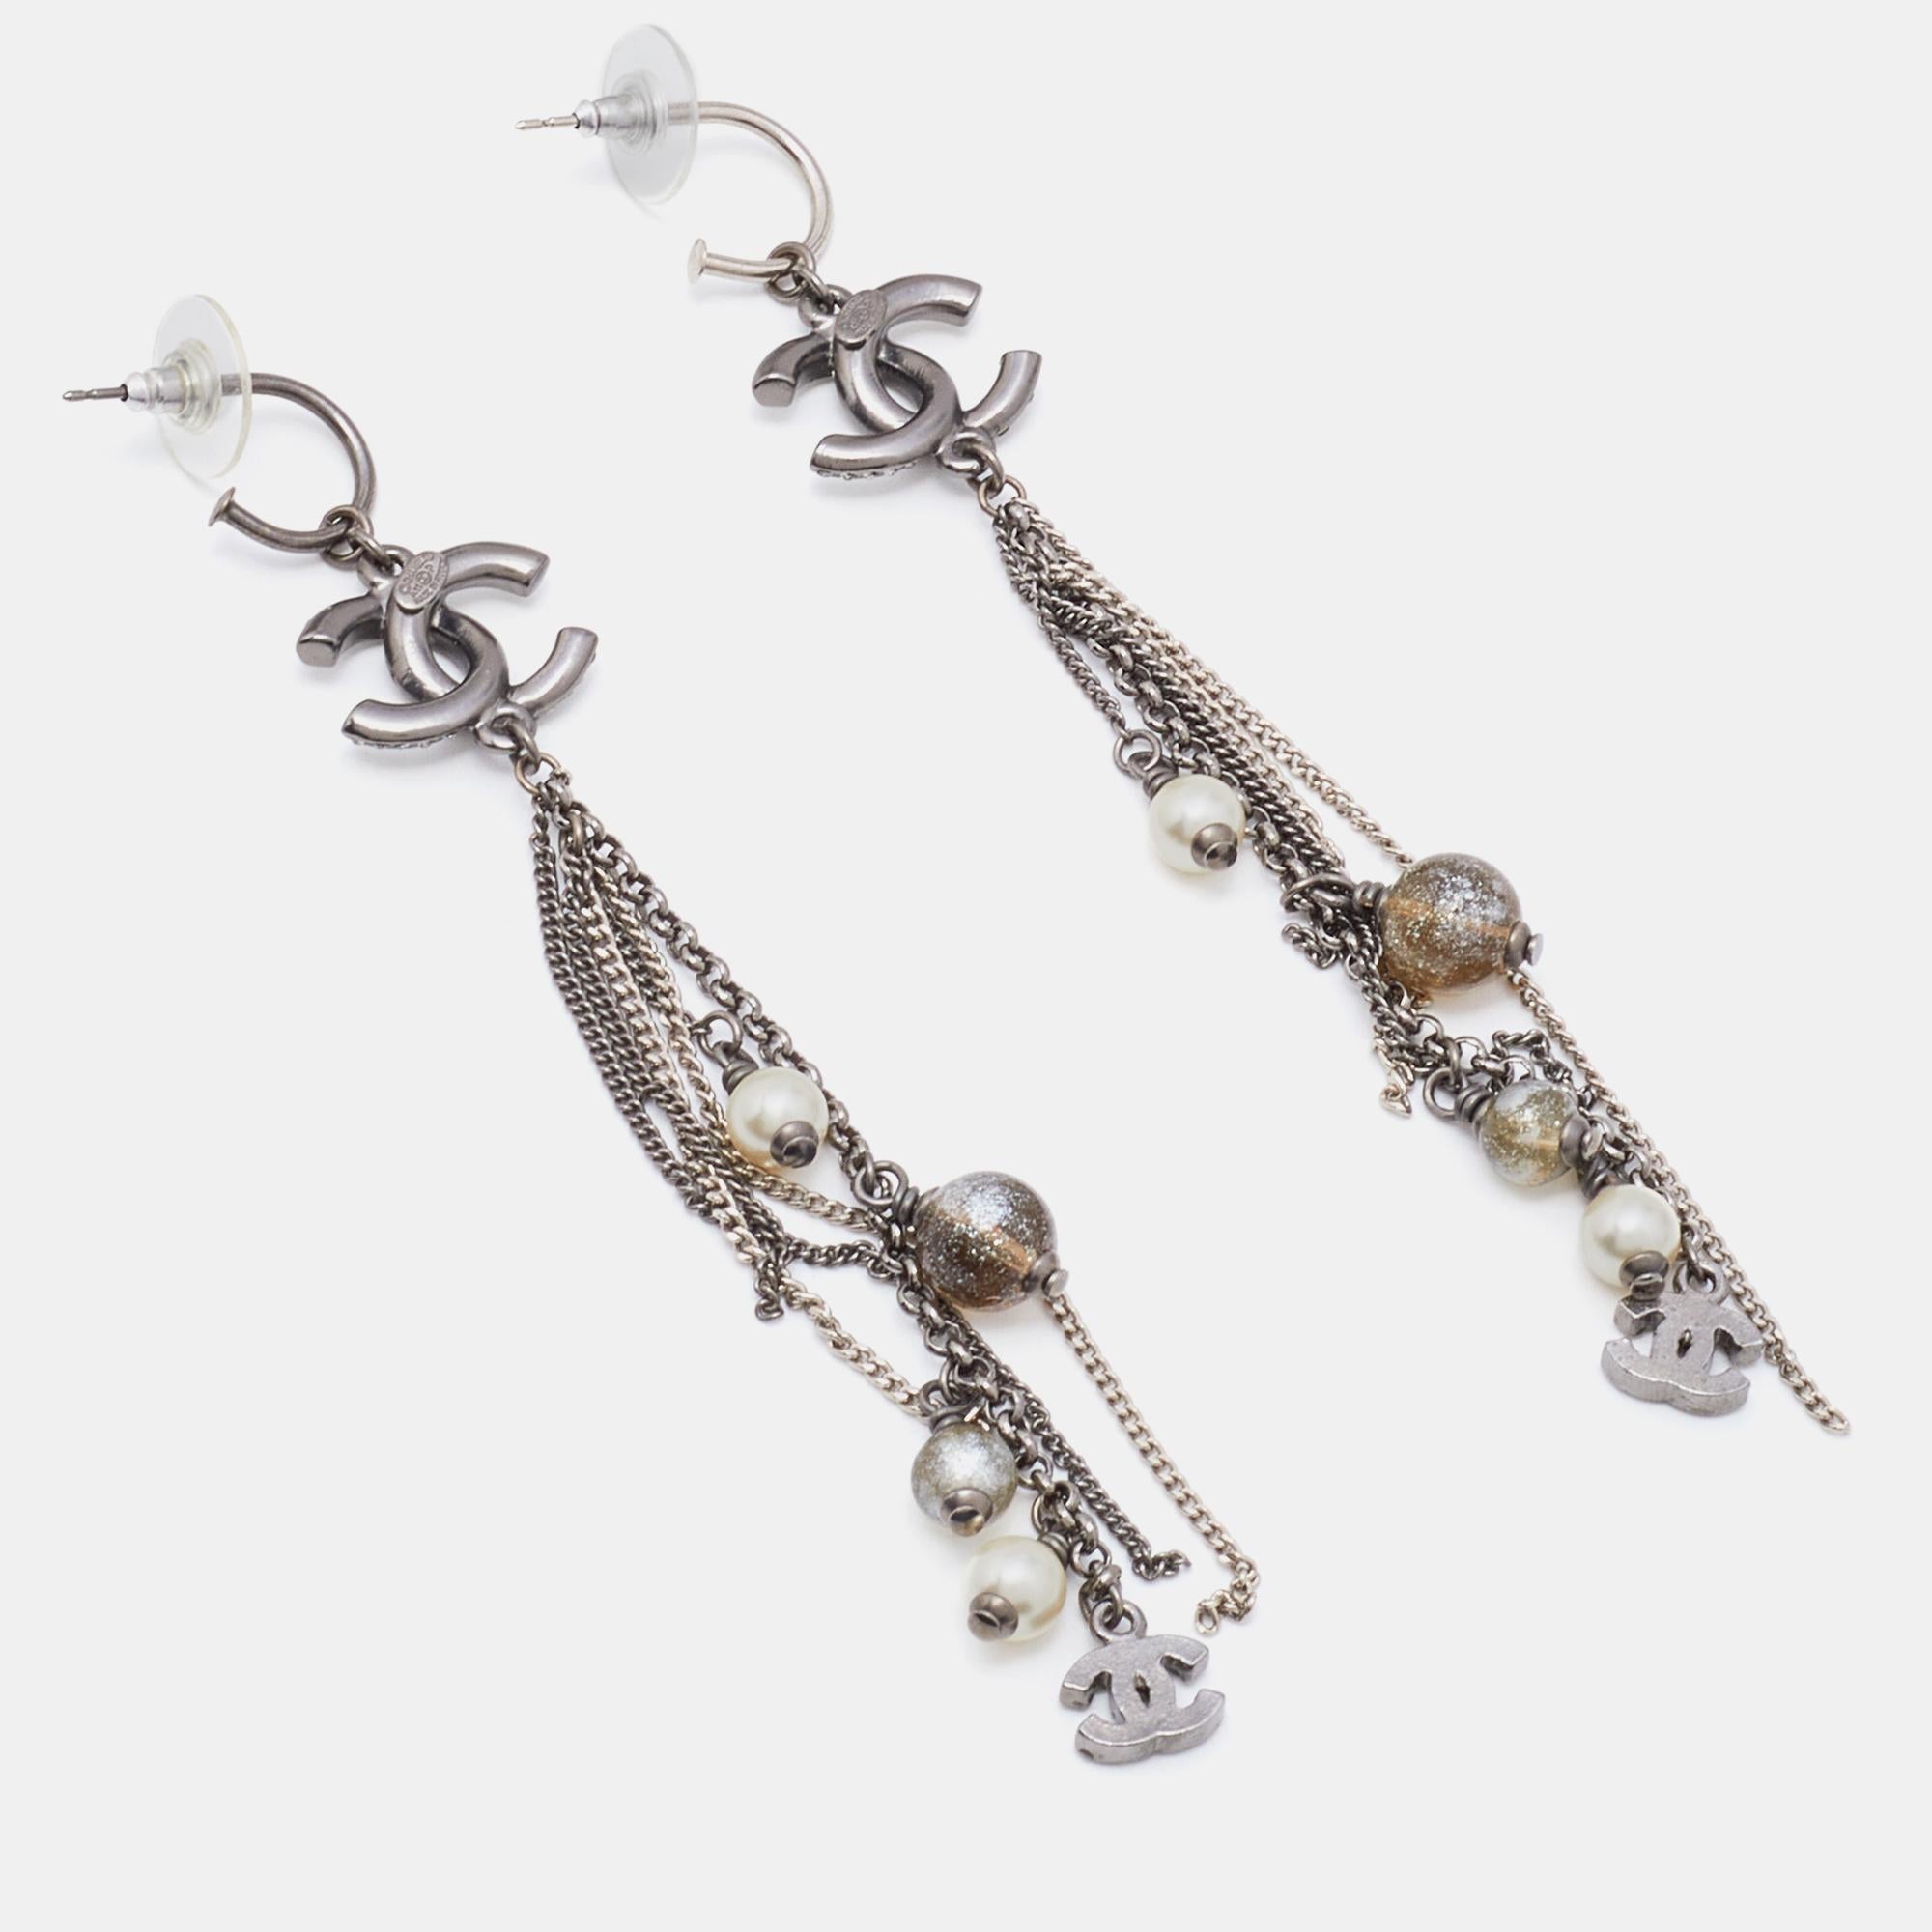 Designed with a gunmetal tone, these long dangle earrings from Chanel will complement an evening look with ease. They feature faux pearls, crystals, beads, and the iconic CC logo motifs. Highlight your outfits with this elegant pair.

